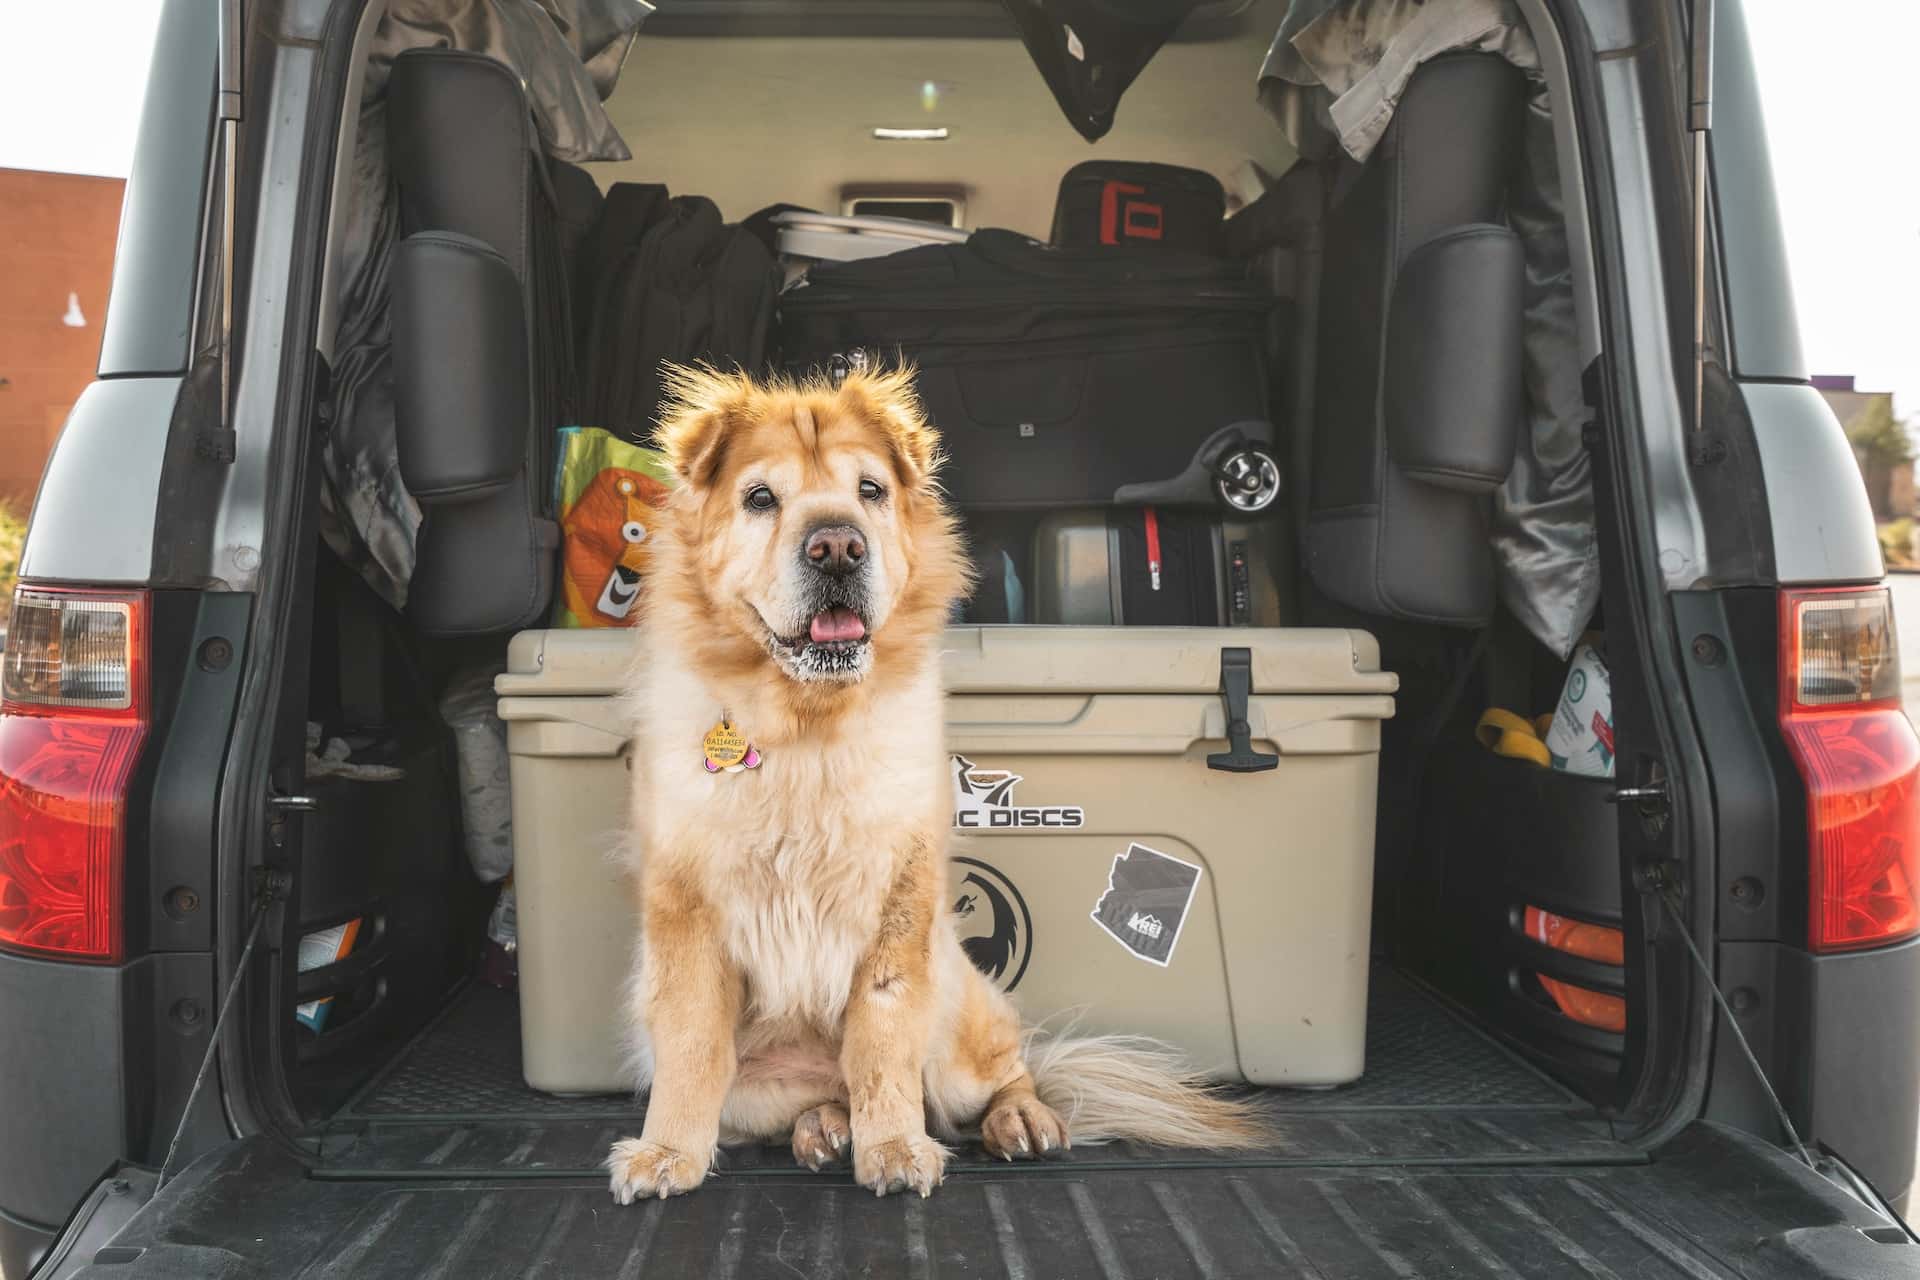 Our car organising hacks are just what you need to get your car clutter-free! Here's top car storage tricks to keep your ride clean and tidy.